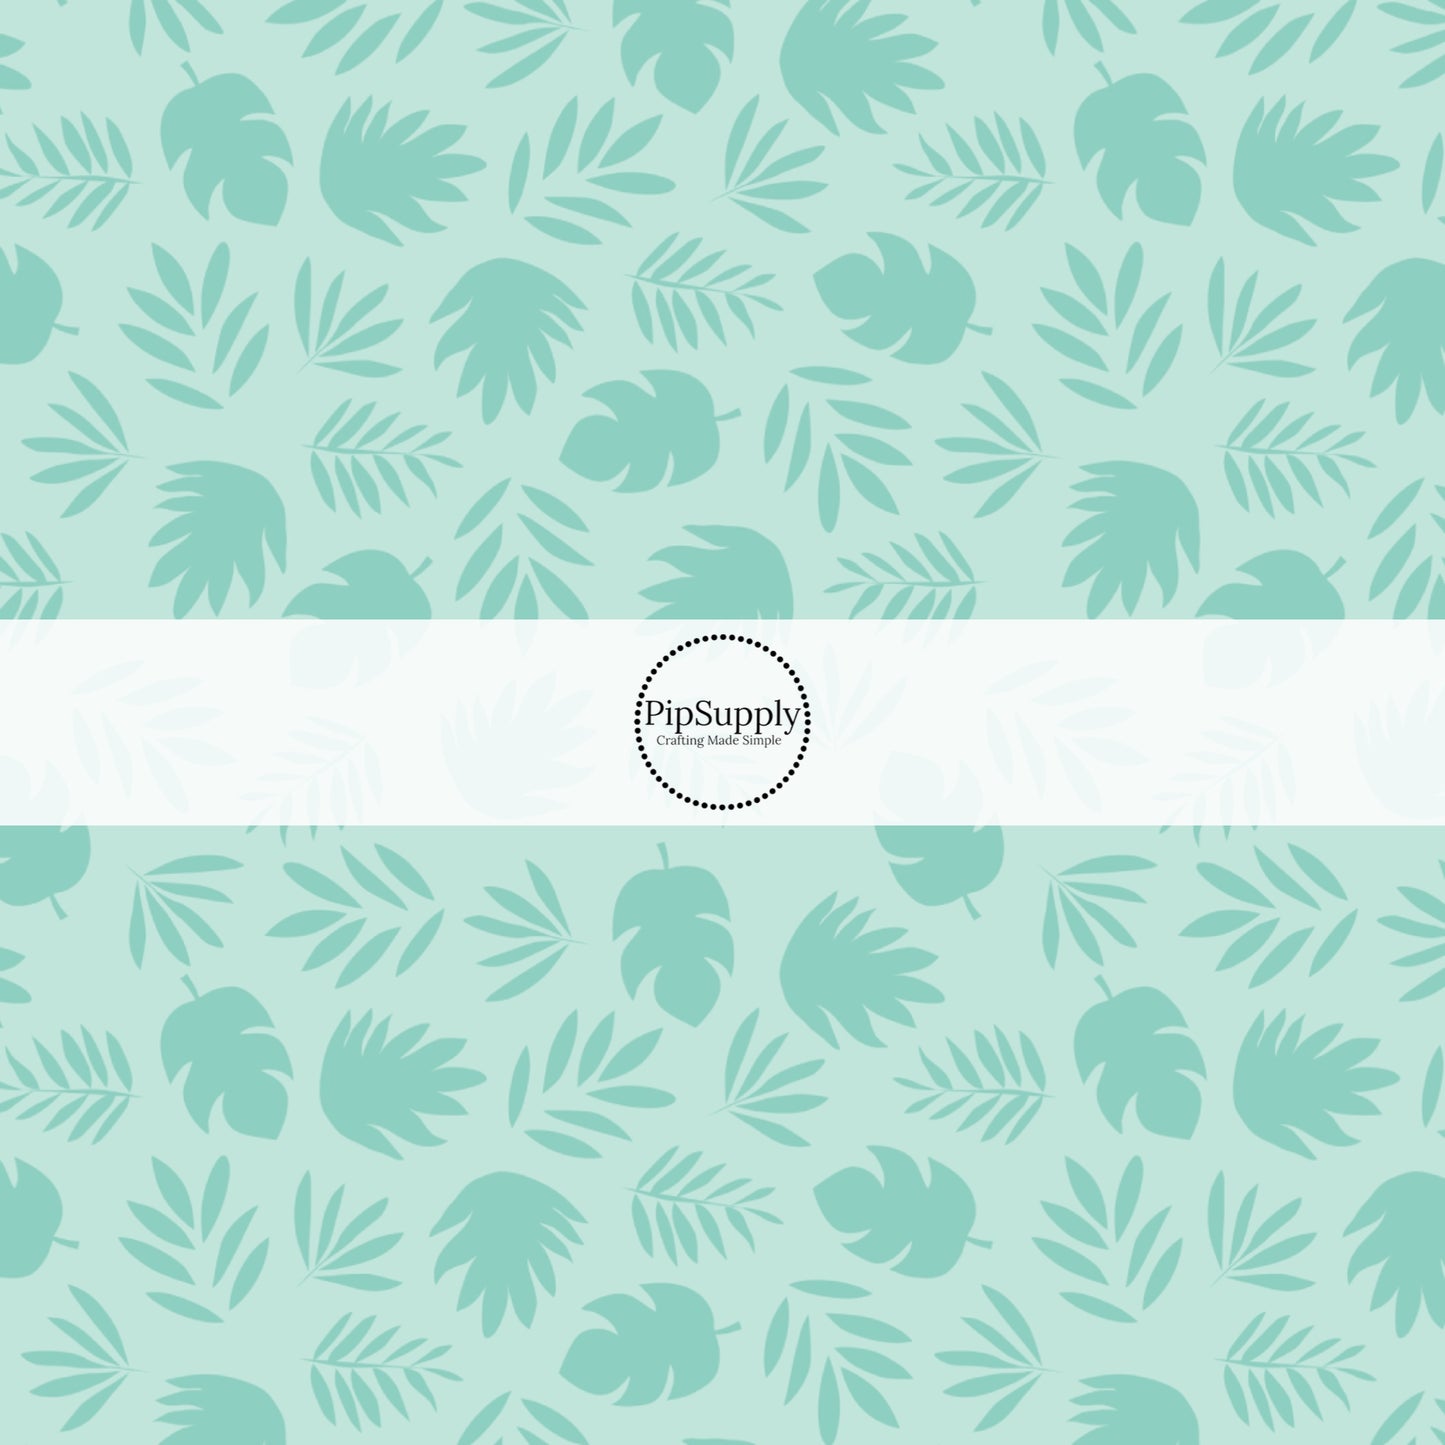 This summer fabric by the yard features mint foliage palms. This fun summer themed fabric can be used for all your sewing and crafting needs!